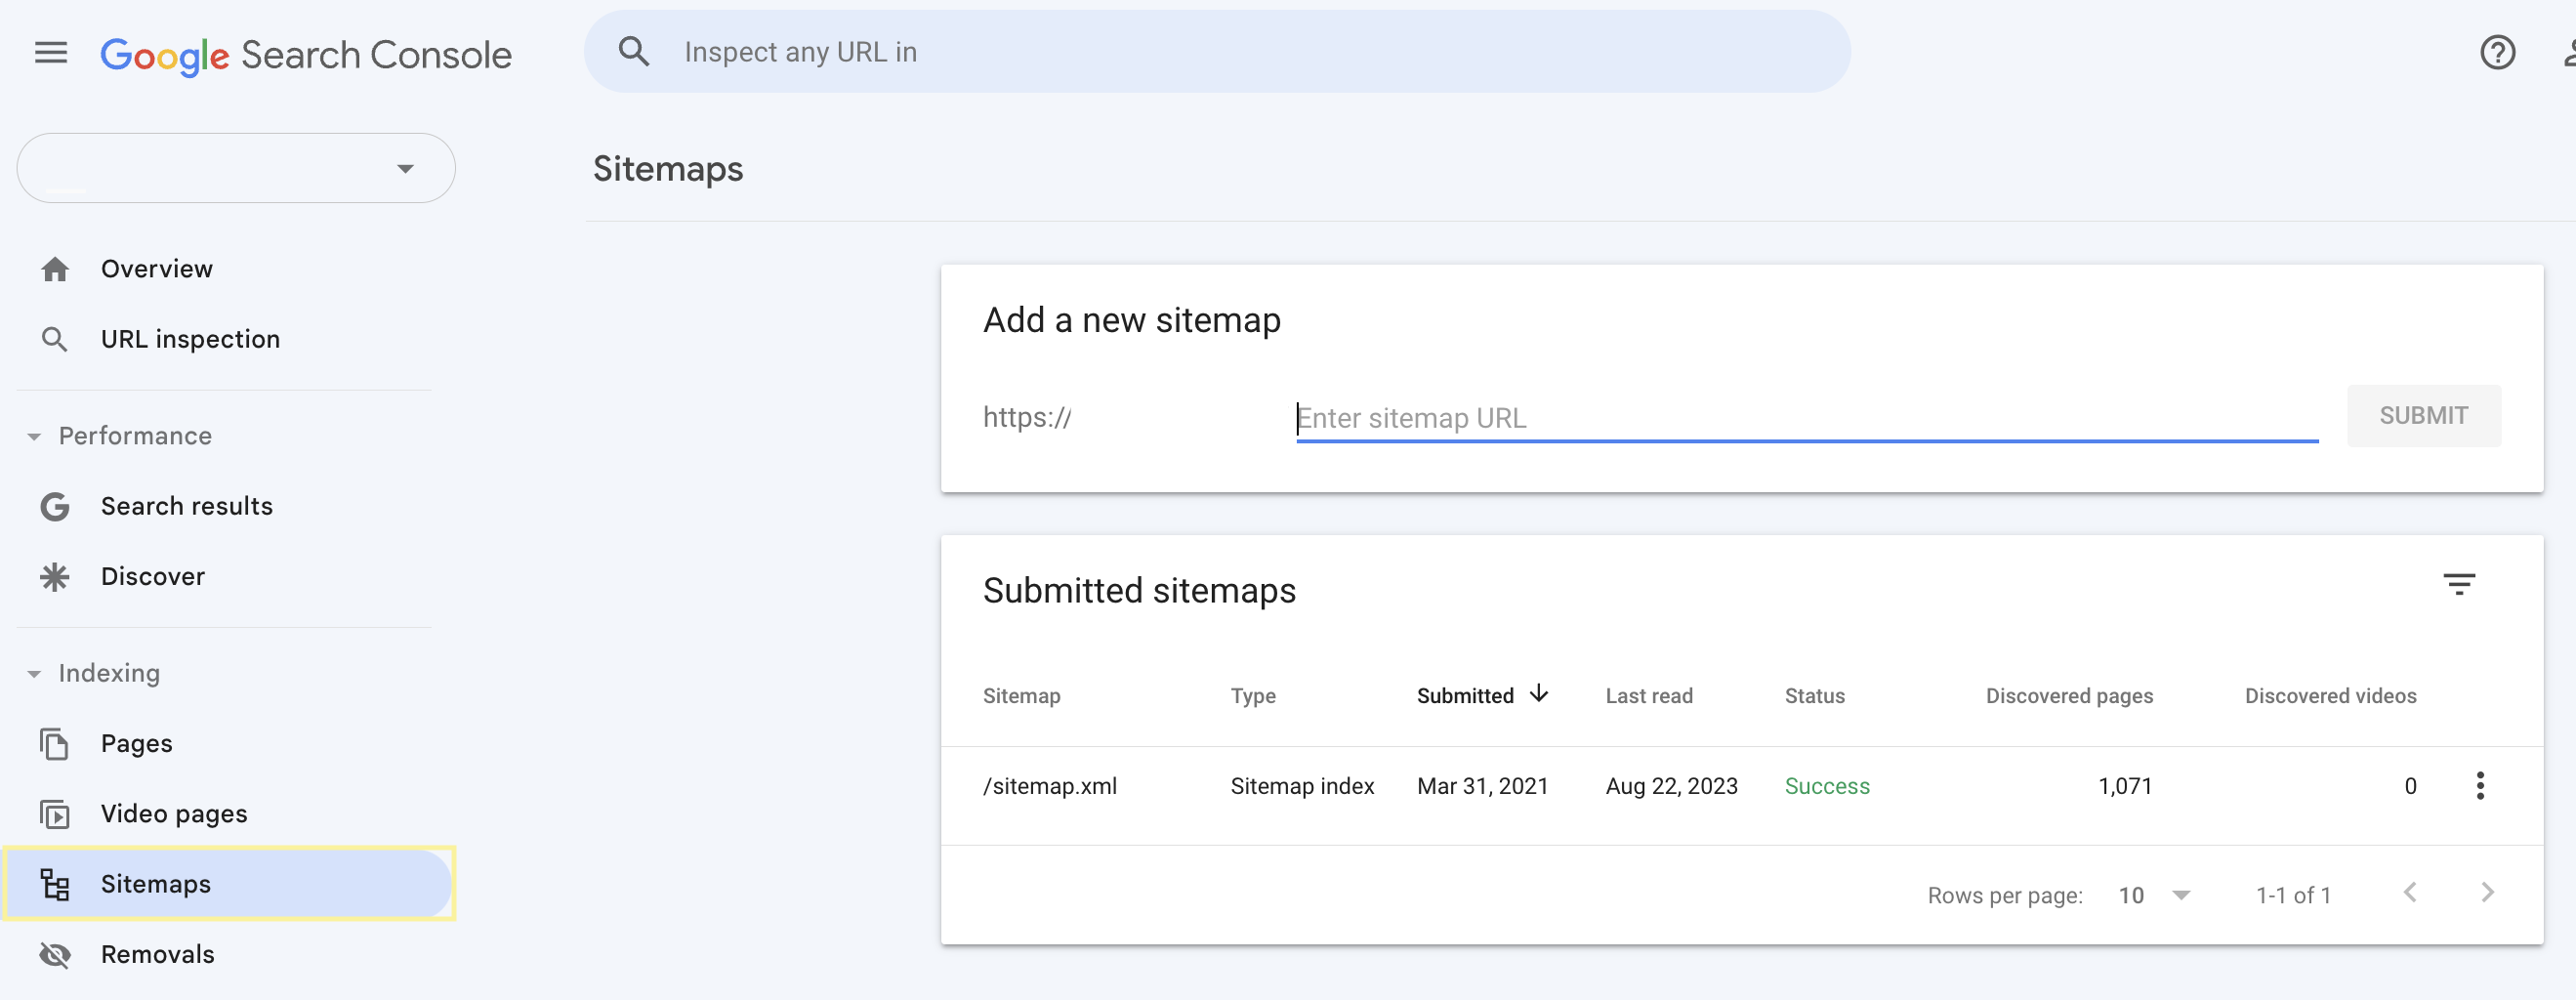 Screenshot of the Google Search Console Sitemaps overview  